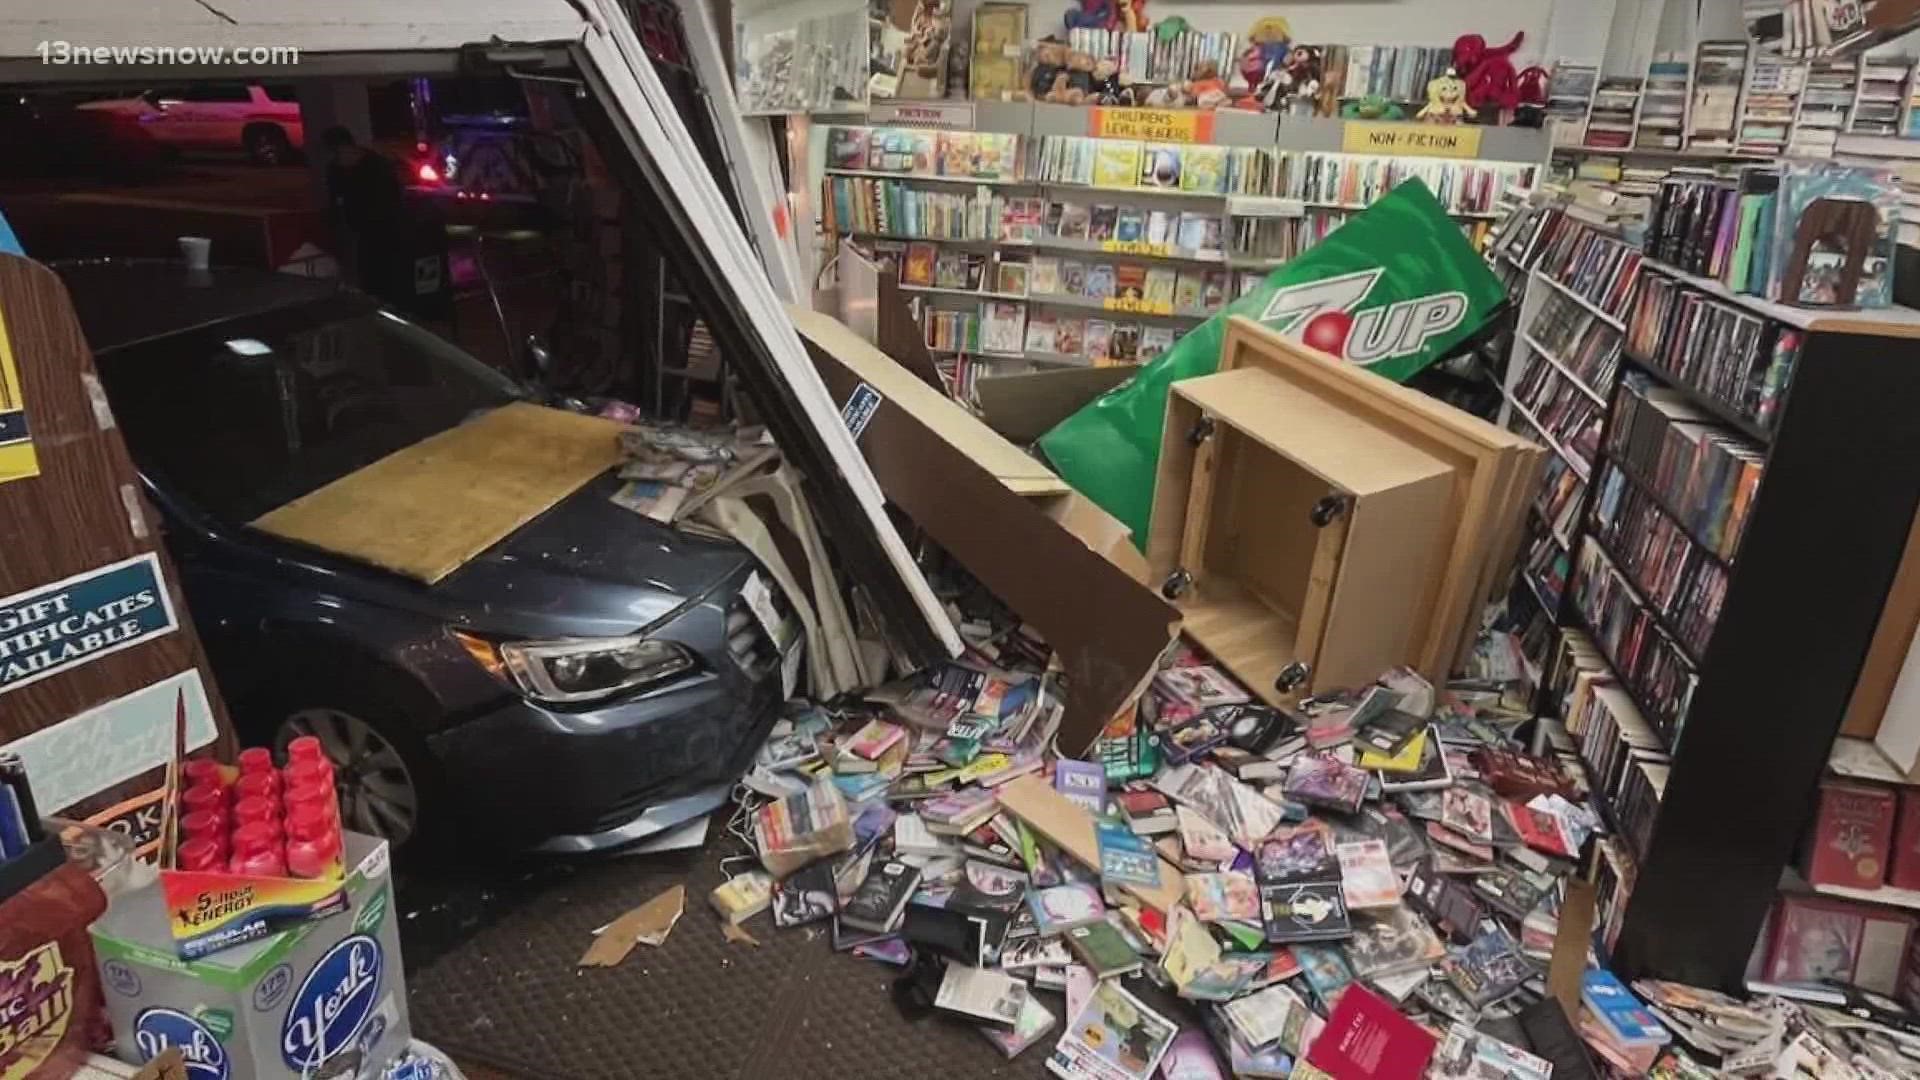 The crash injured two customers inside Smith Discount Books.